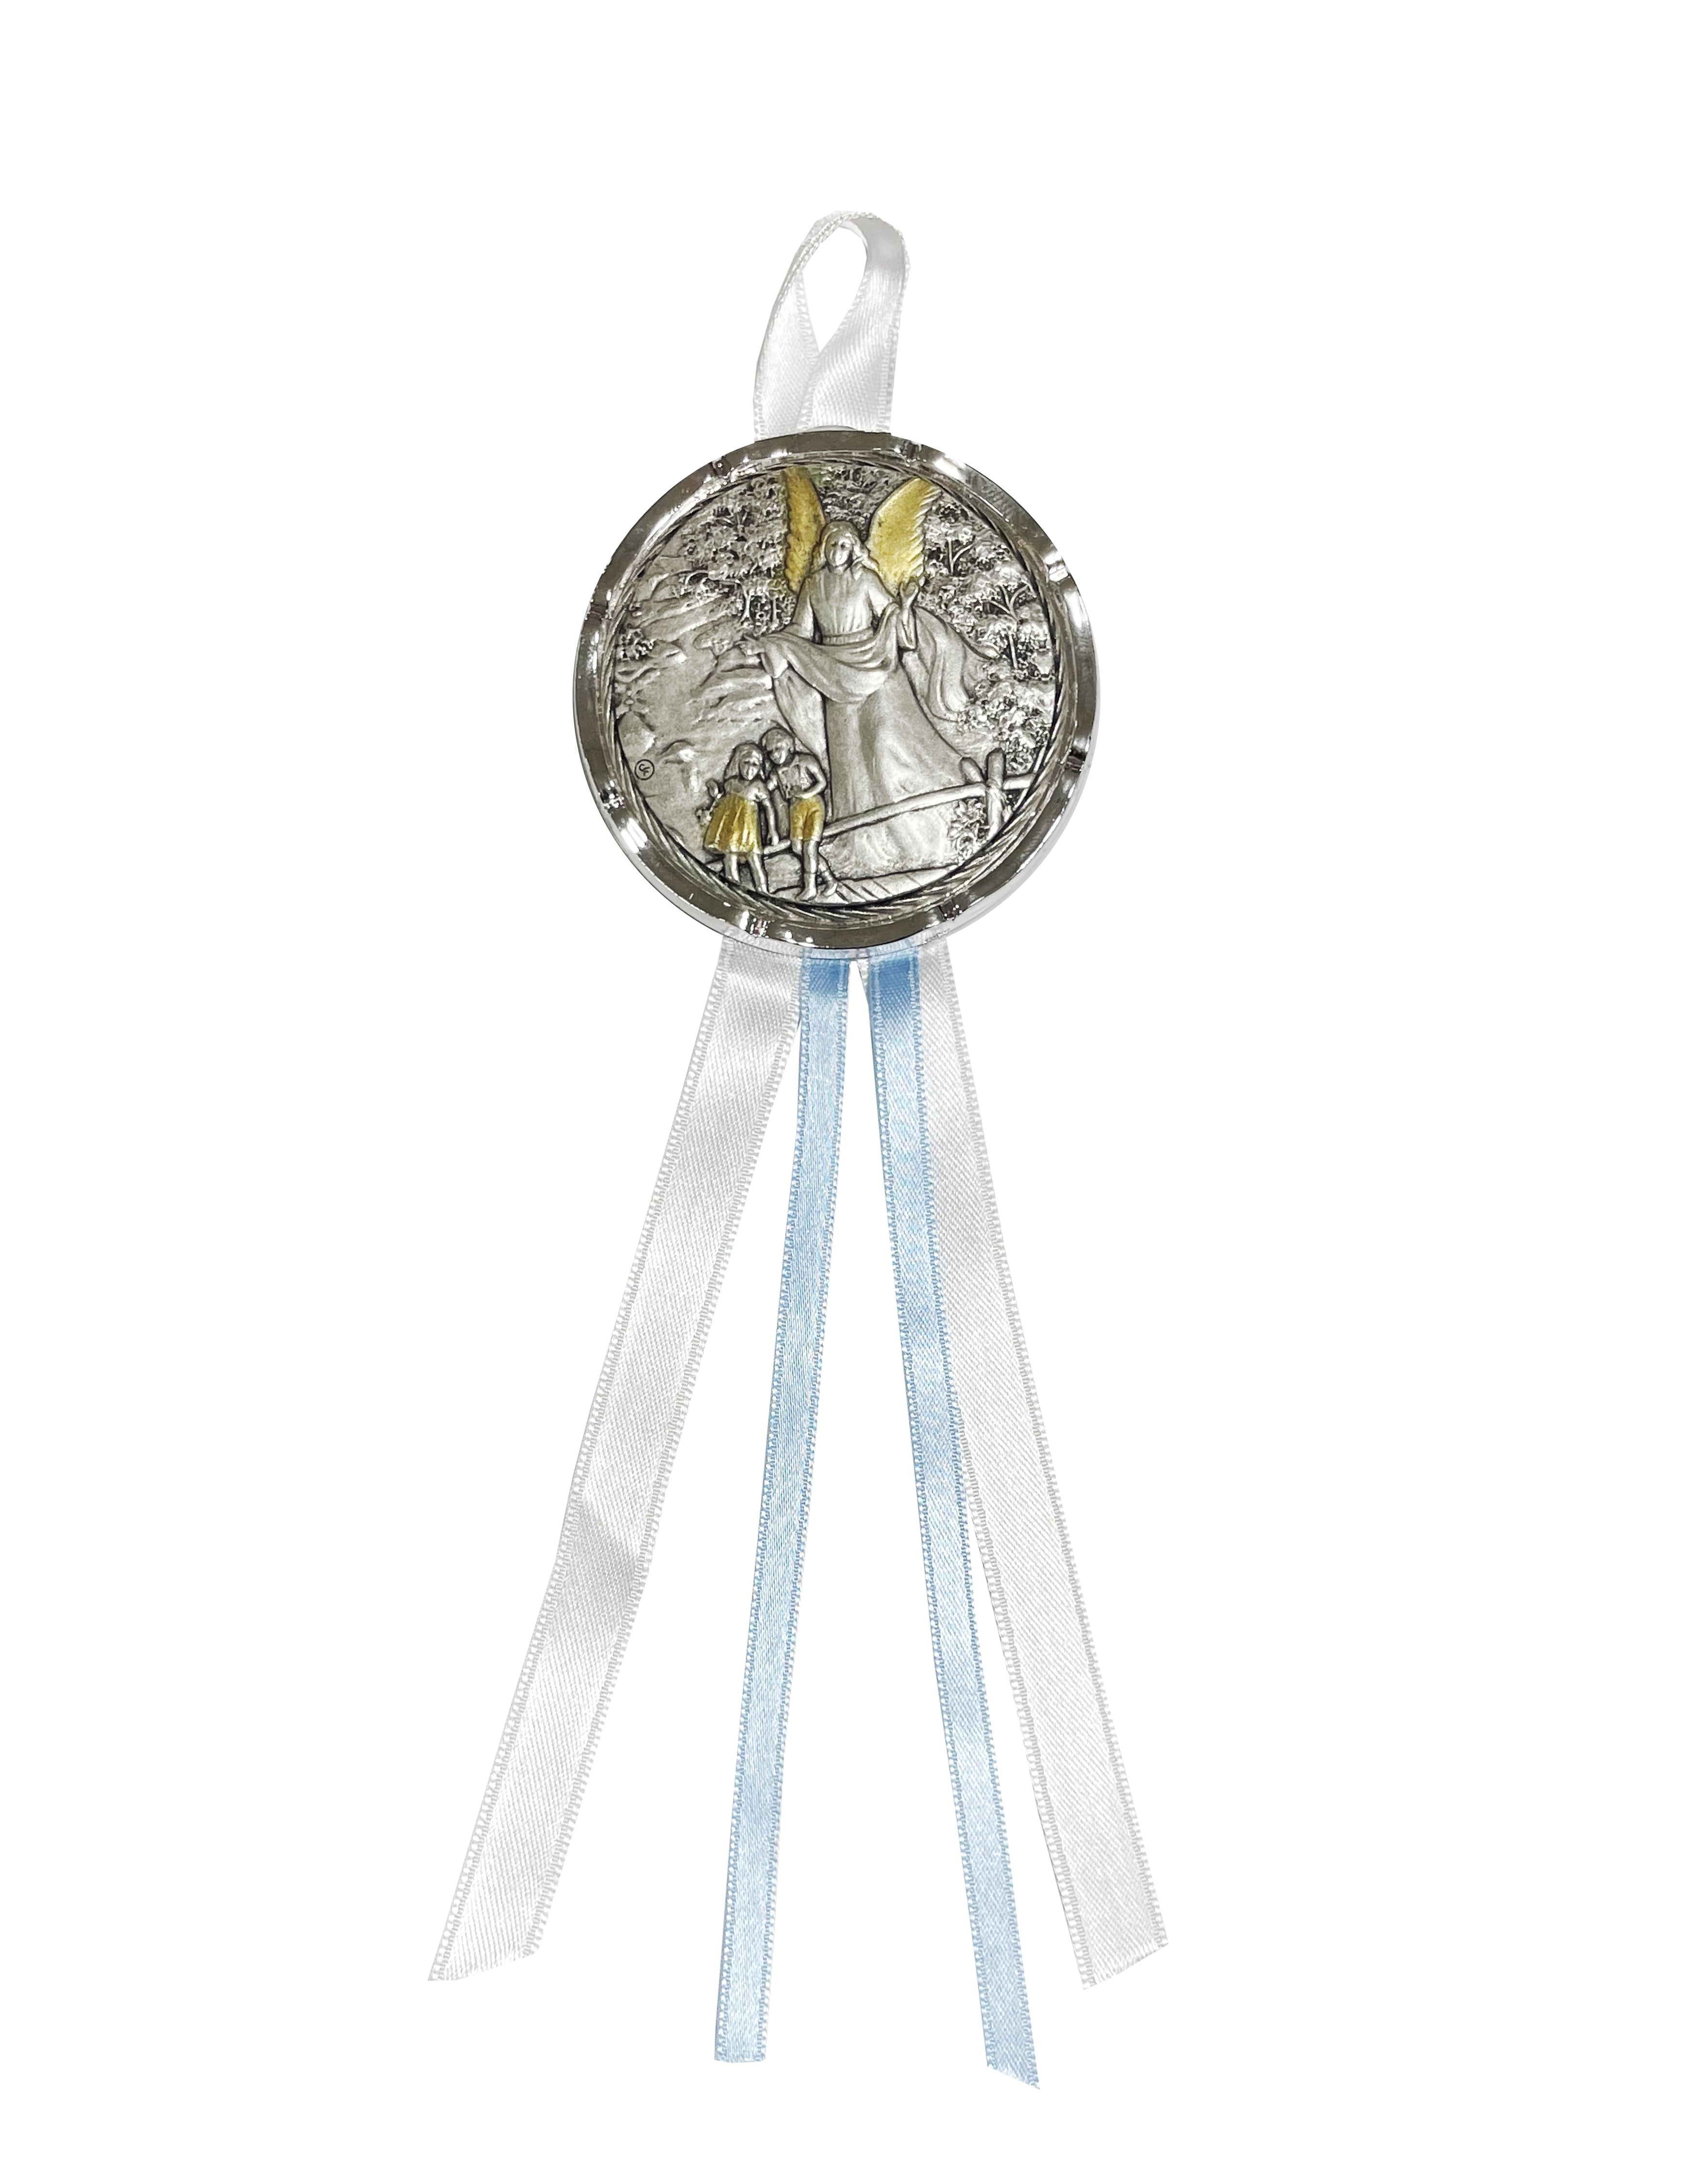 Guardian Angel crib medal, round decorated with silk ribbon